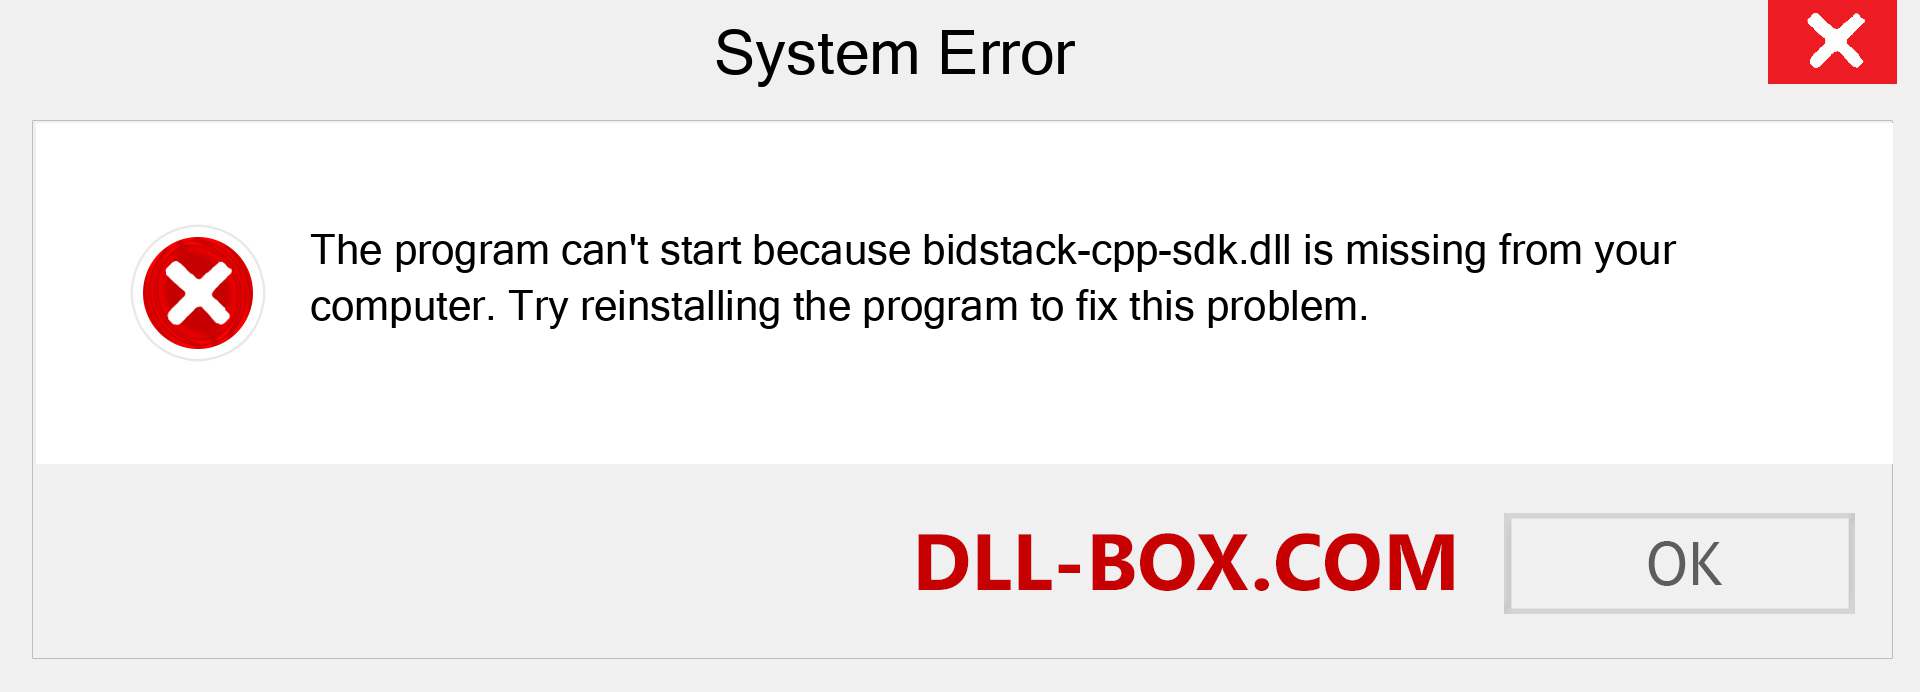  bidstack-cpp-sdk.dll file is missing?. Download for Windows 7, 8, 10 - Fix  bidstack-cpp-sdk dll Missing Error on Windows, photos, images